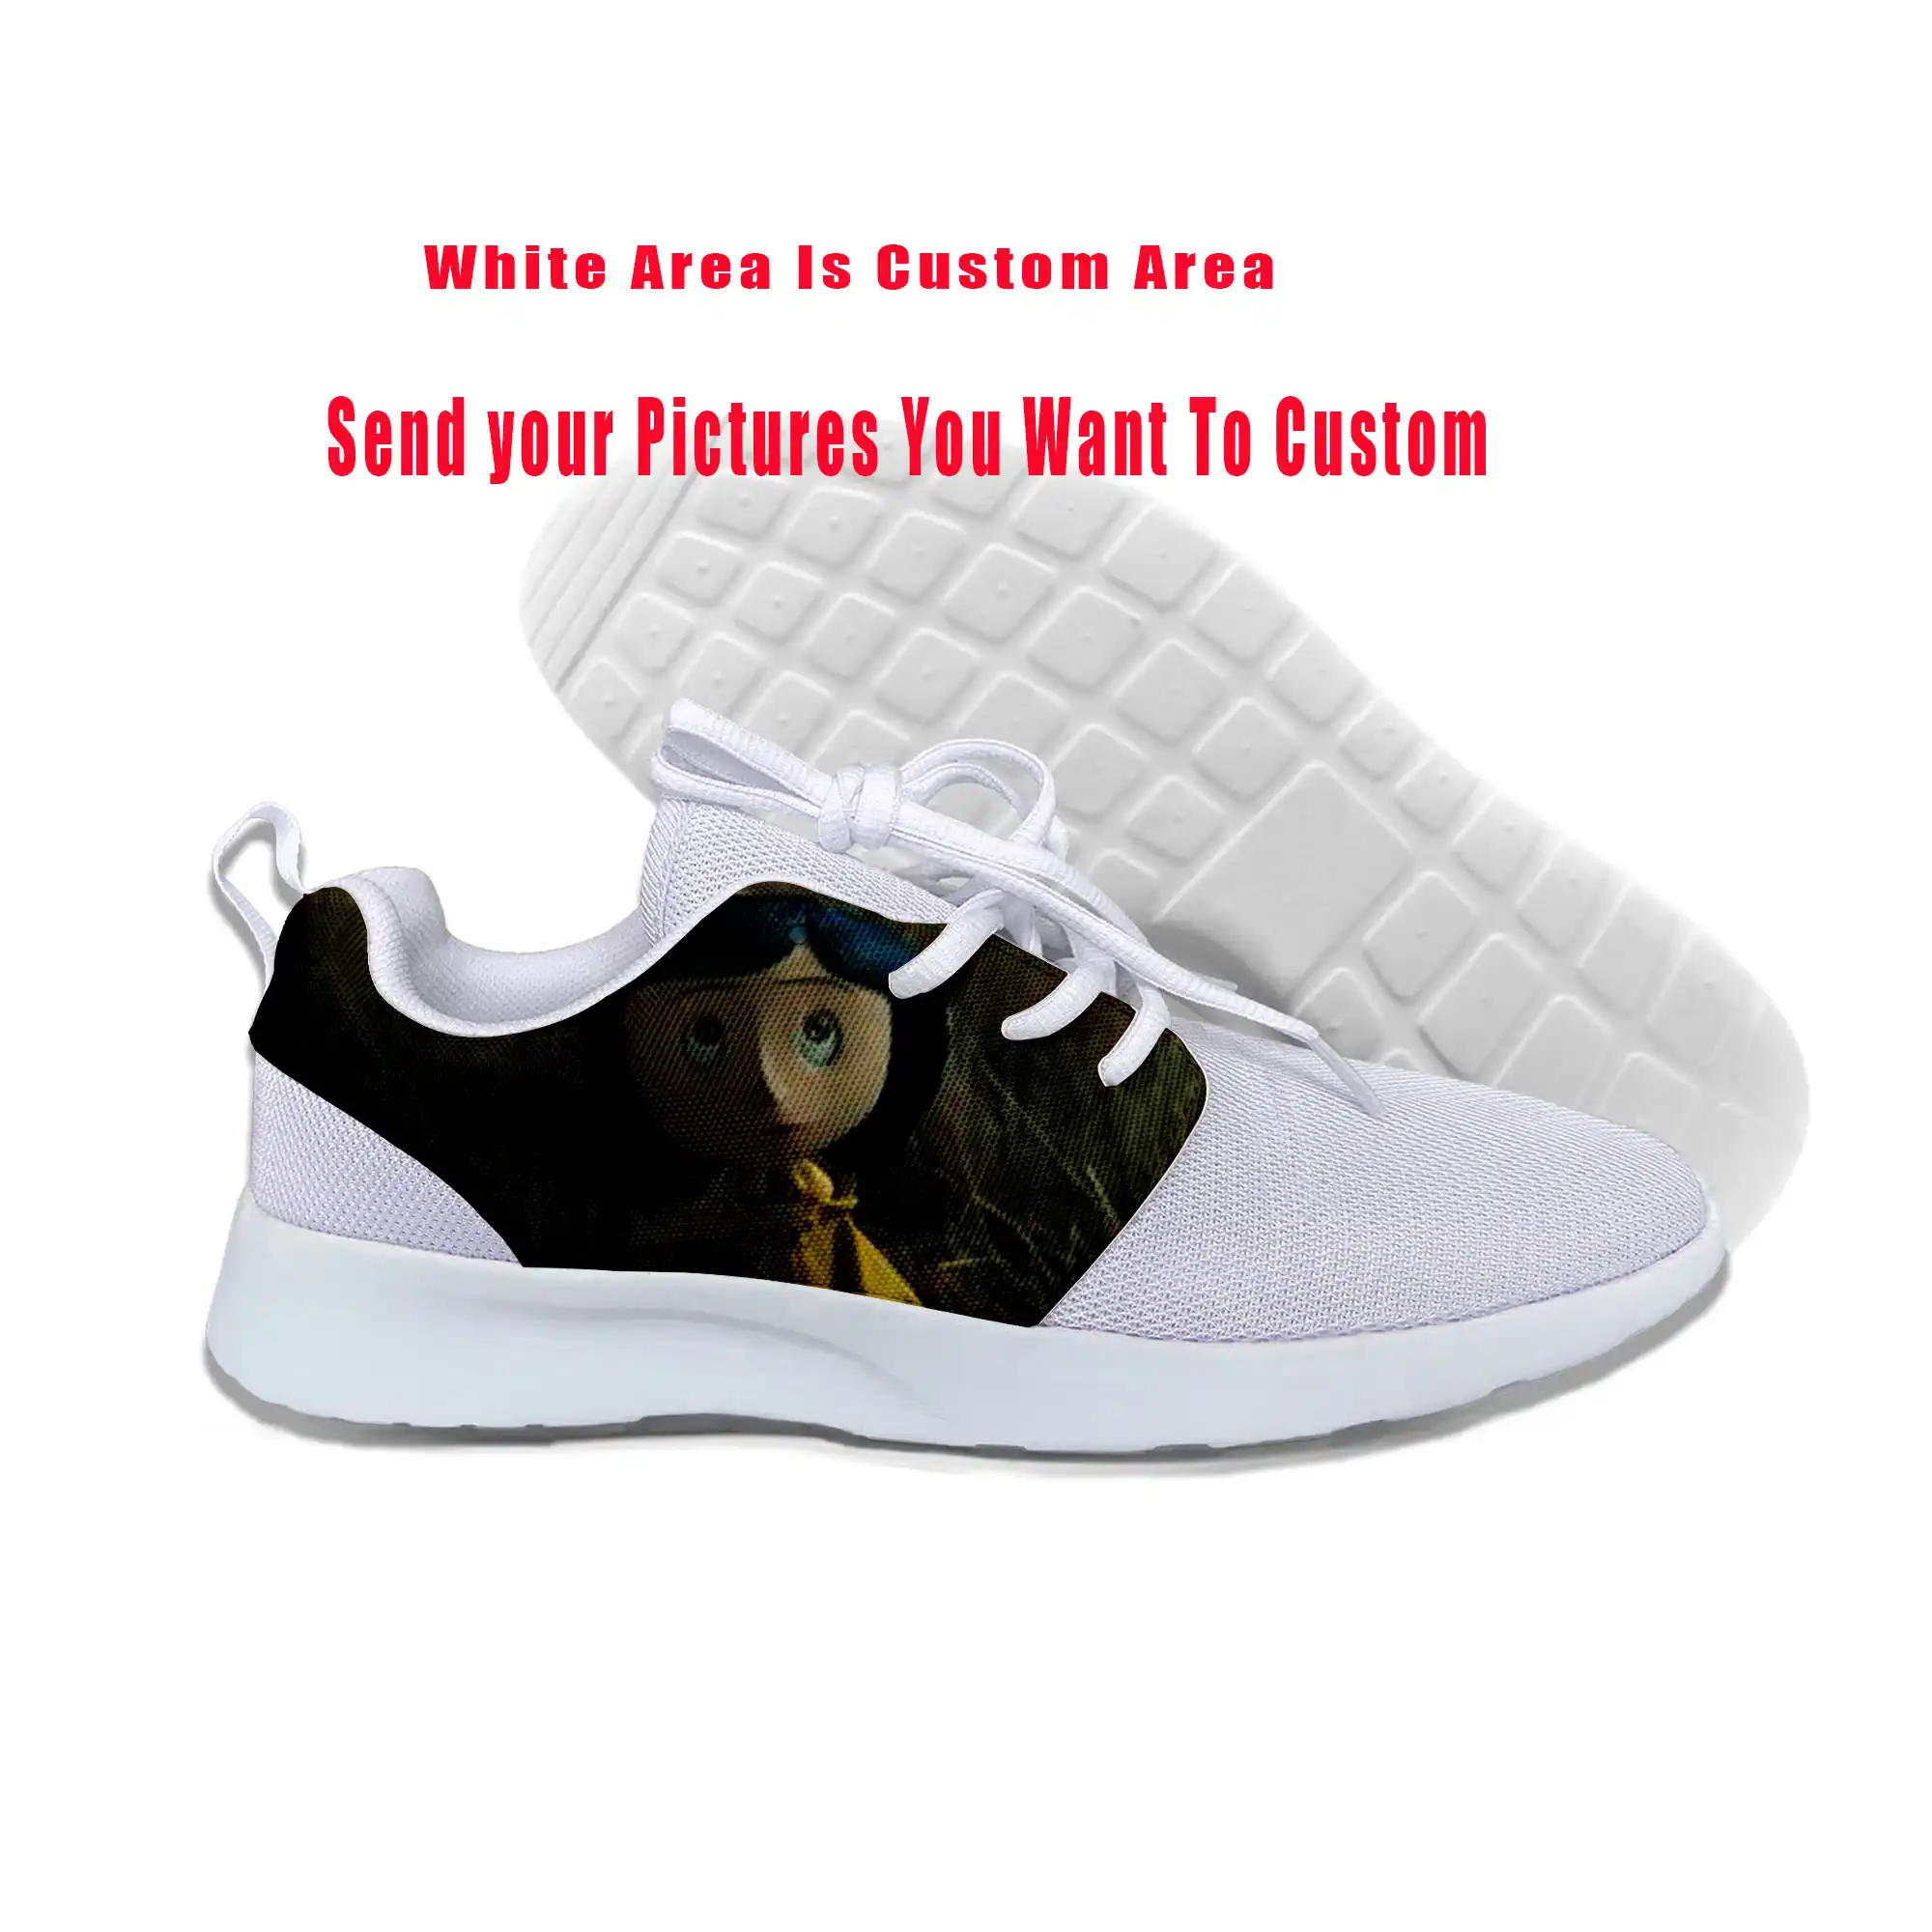 cool new sneakers 2019